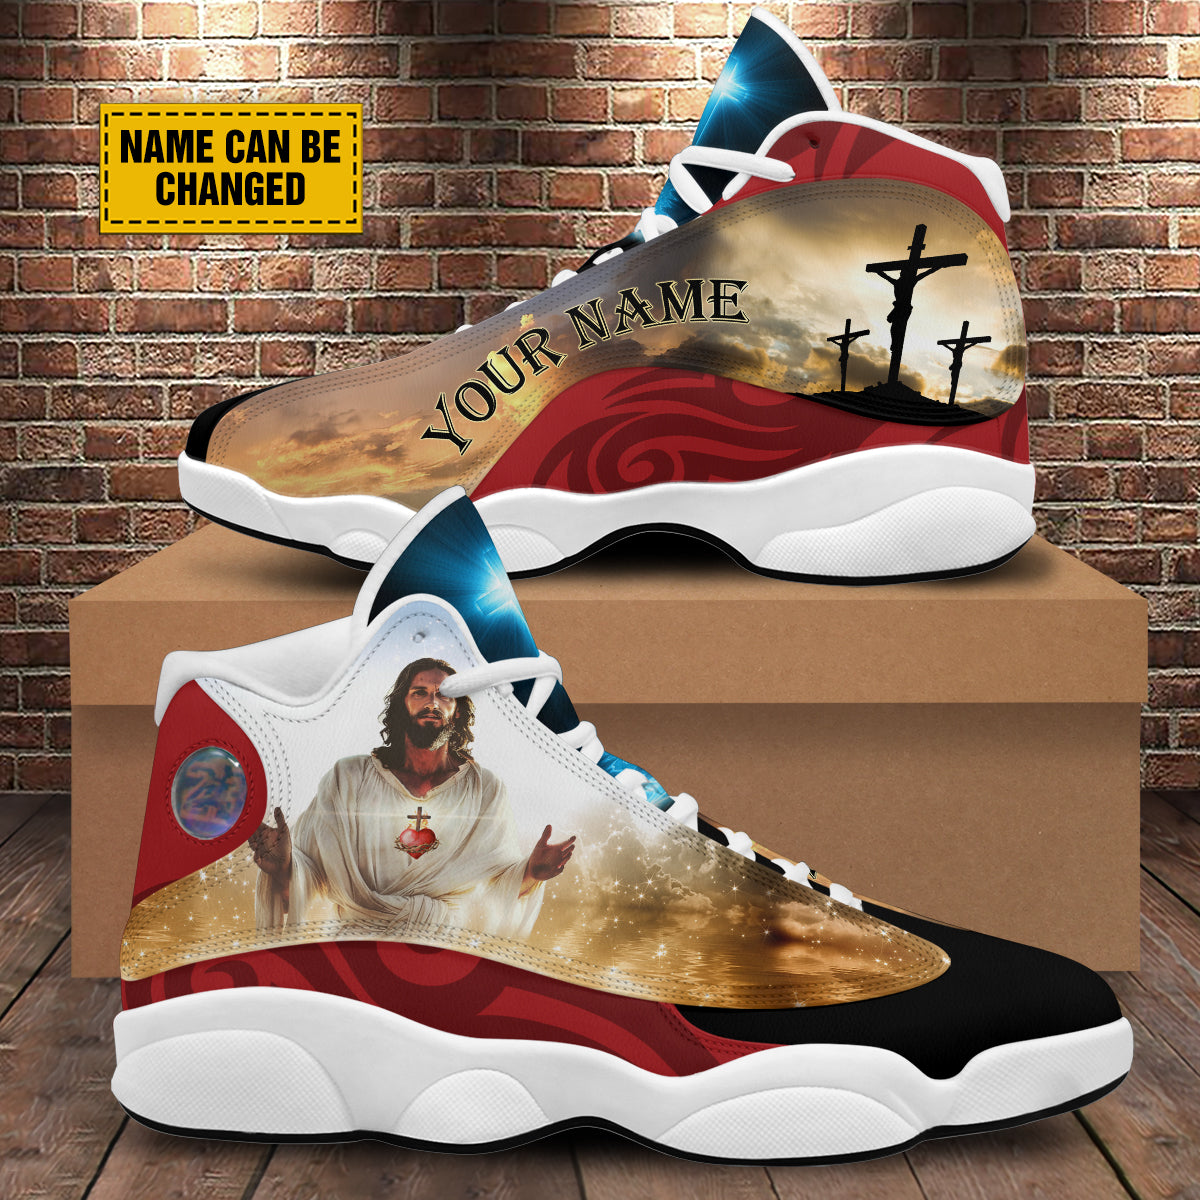 Teesdily | Personalized Jesus Sacred Heart Basketball Shoes, Christian Shoes, Religious Gifts, Jesus Christ Lover Unisex Basketball Shoes With Thick Soles